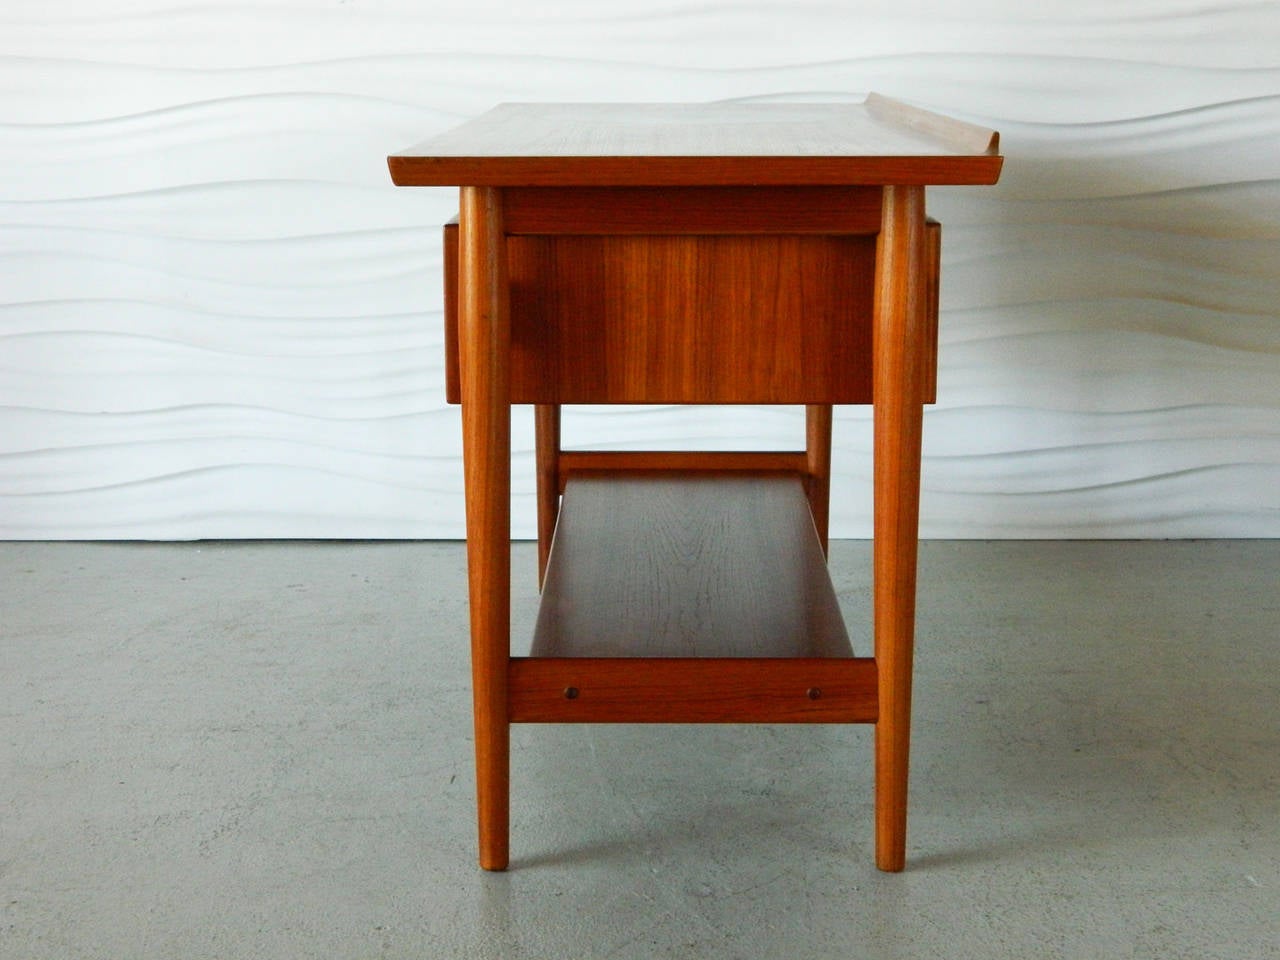 Designed by Danish designer Arne Vodder for Sibast, this handsome teak console has a floating top, four drawers, and a large open shelf. The top surface has a round formica inlay.